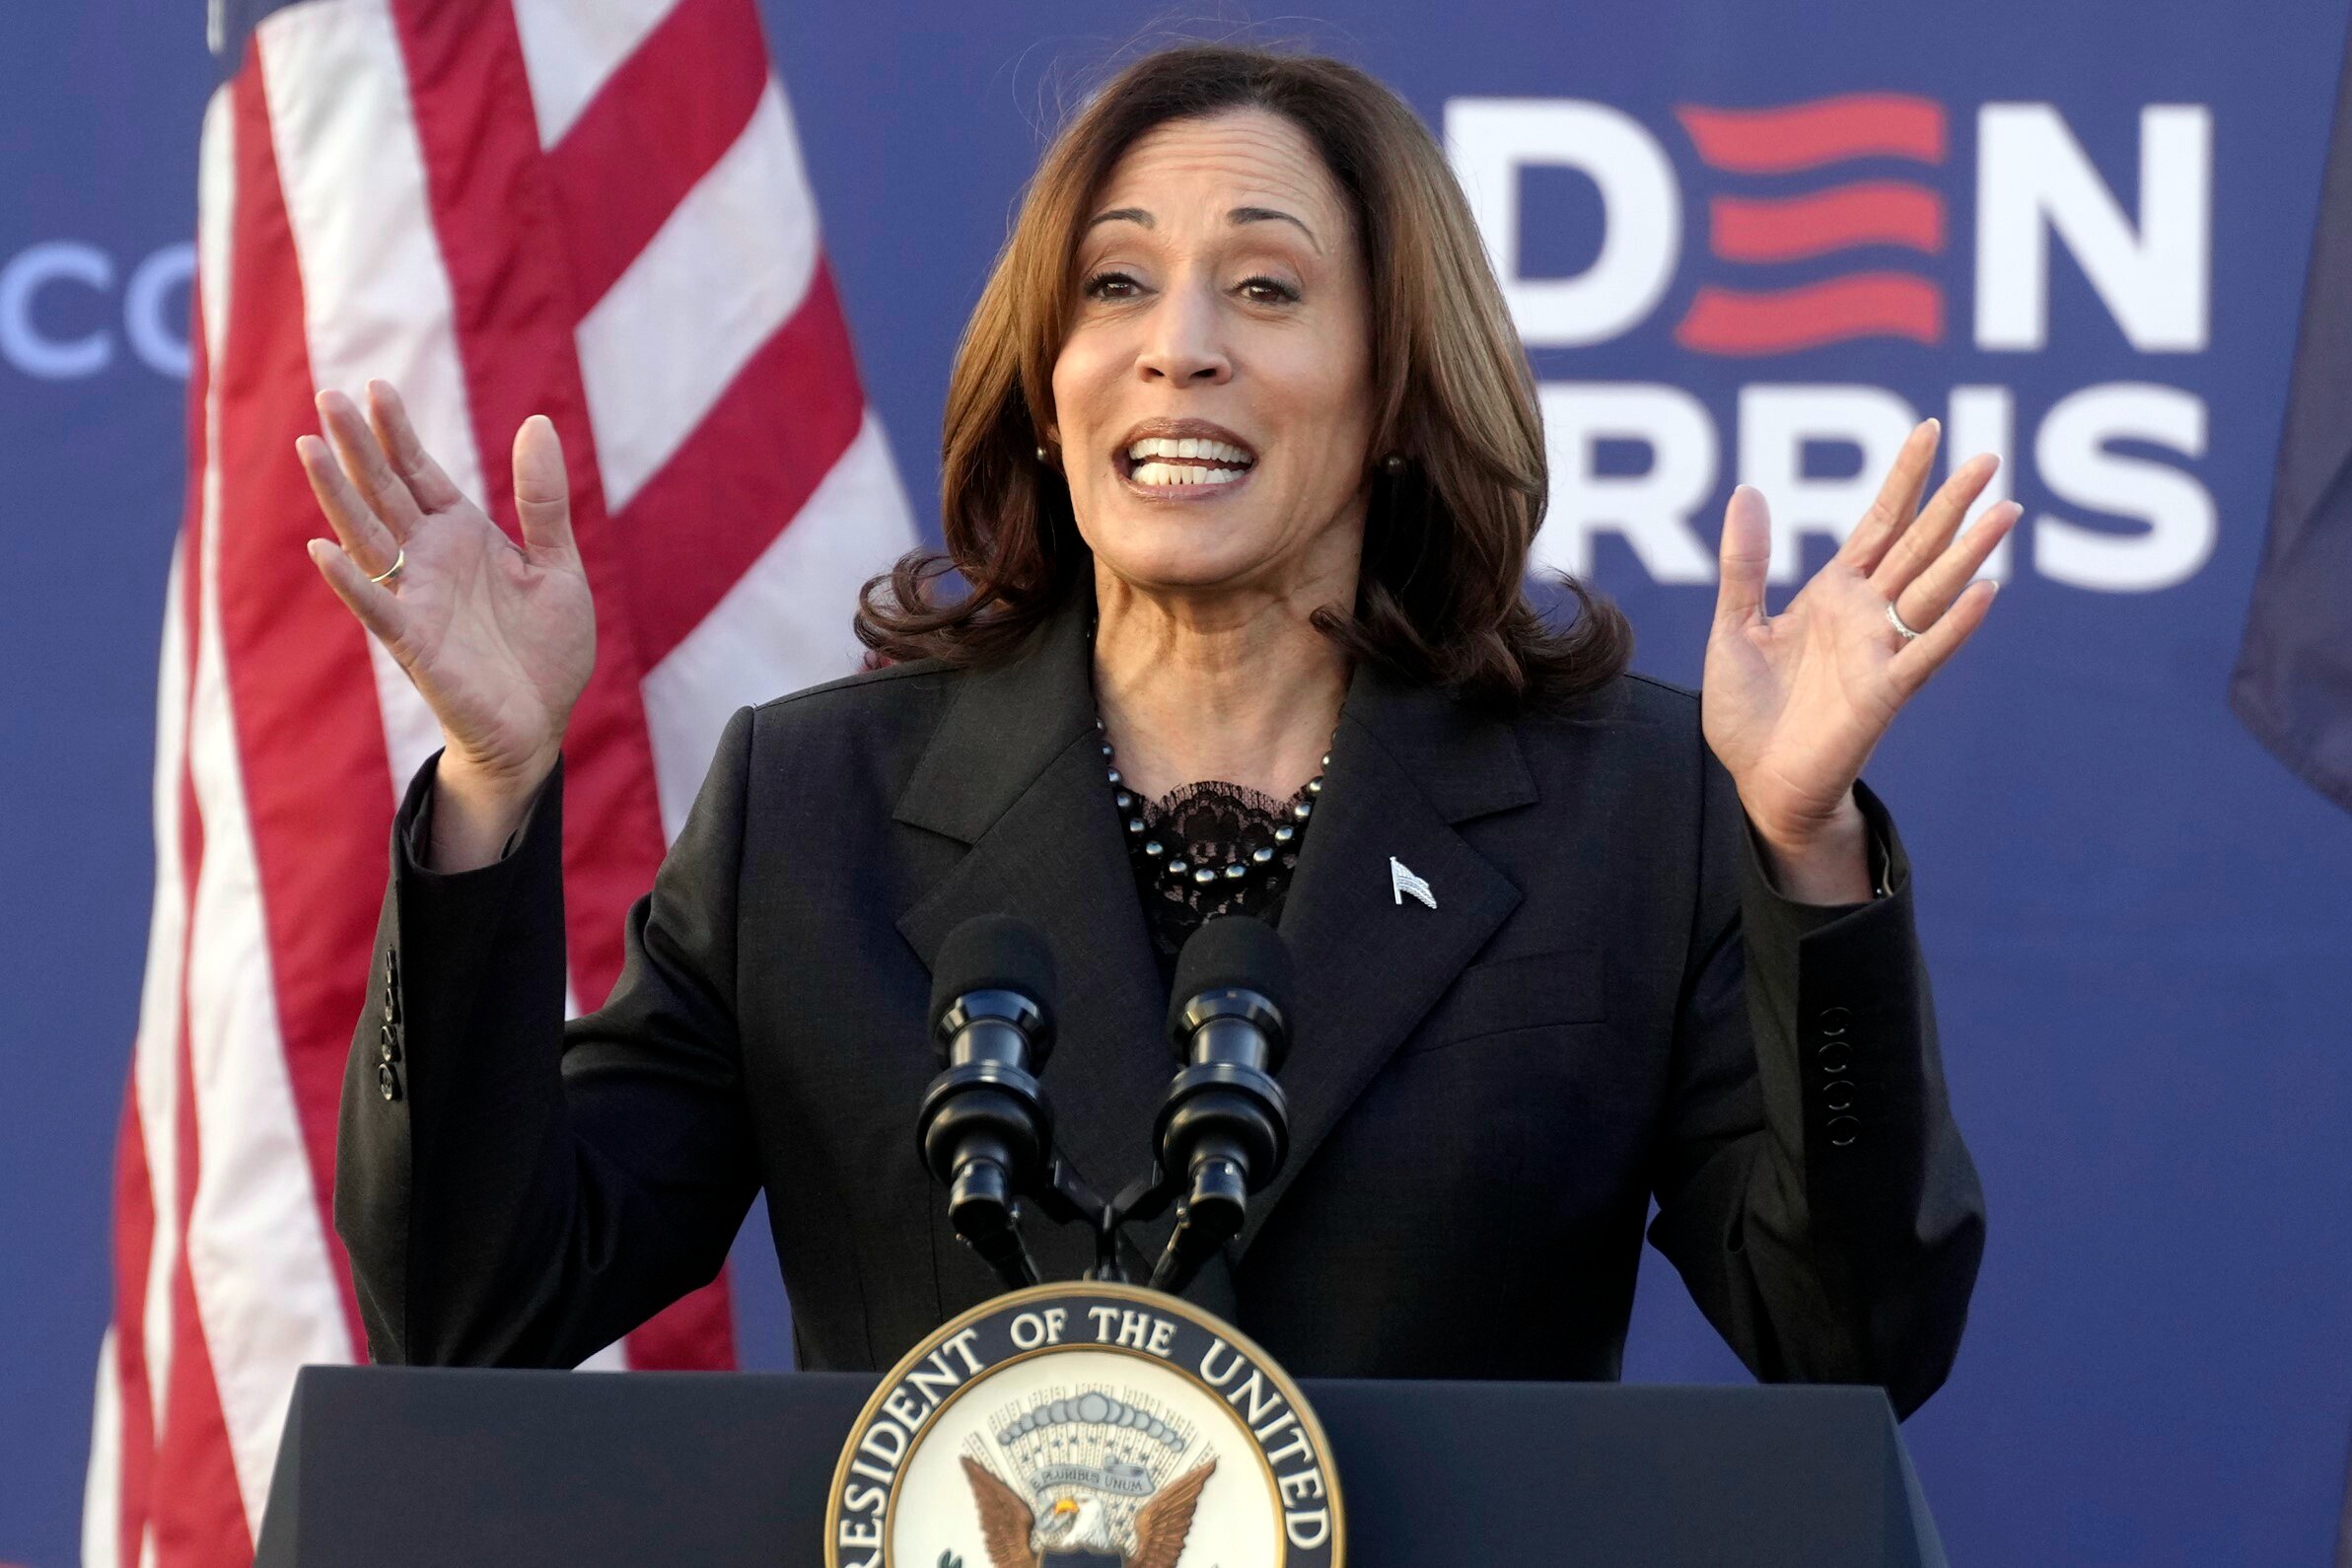 Harris Concludes South Carolina Campaign Push Ahead of Democrats' First-in-the-Nation Primary